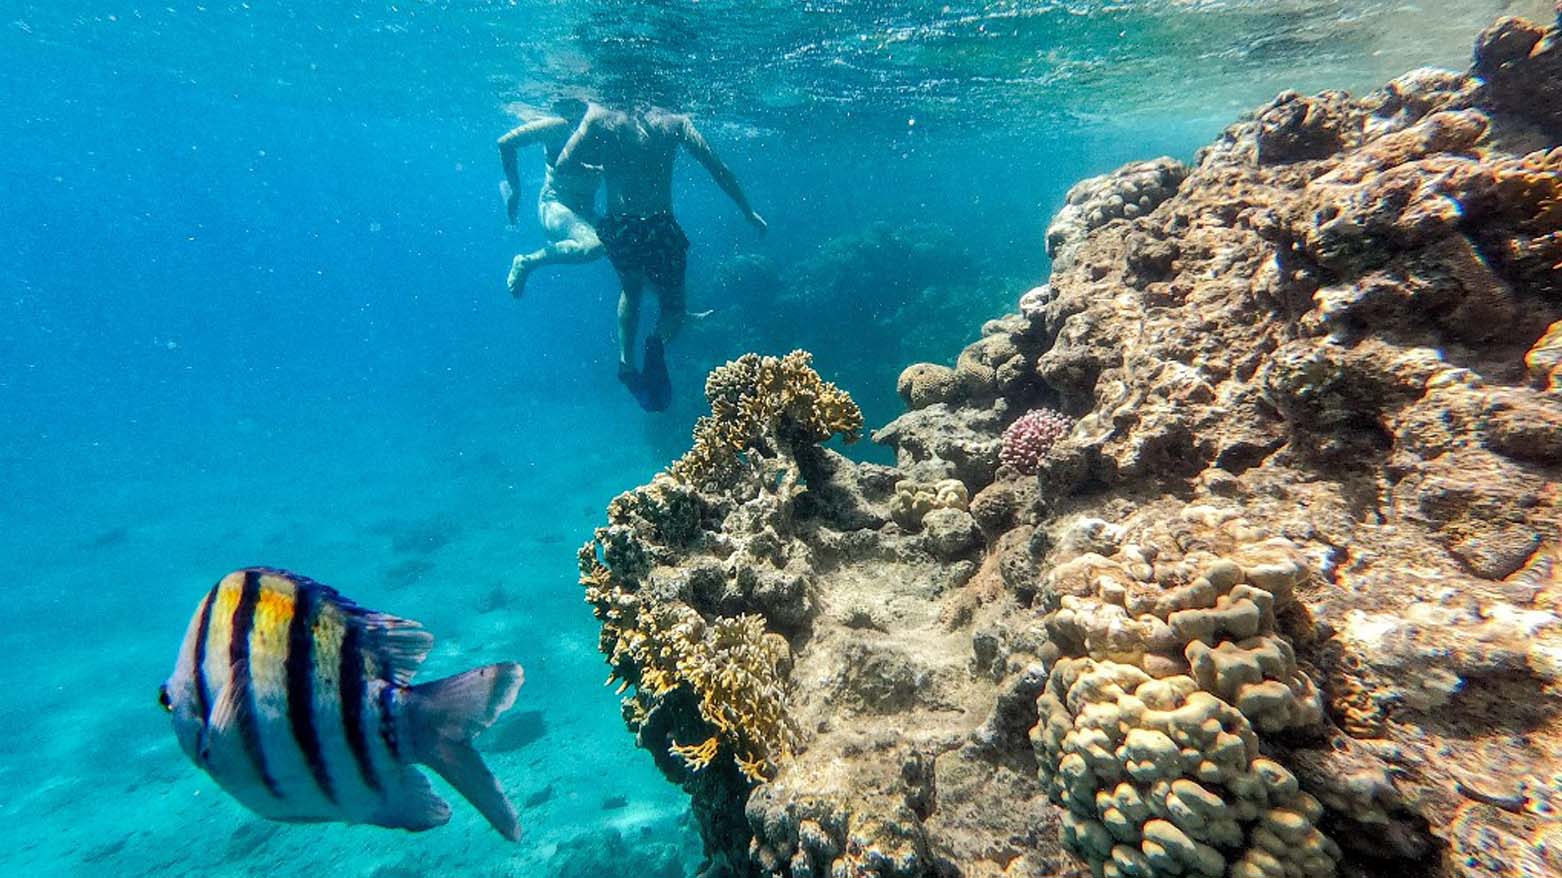 Fish and people swim by the coral reef in the waters of the Red Sea near the southern Israeli city of Eilat, Sept. 14, 2023. (Photo: Menahem Kahana/AFP)